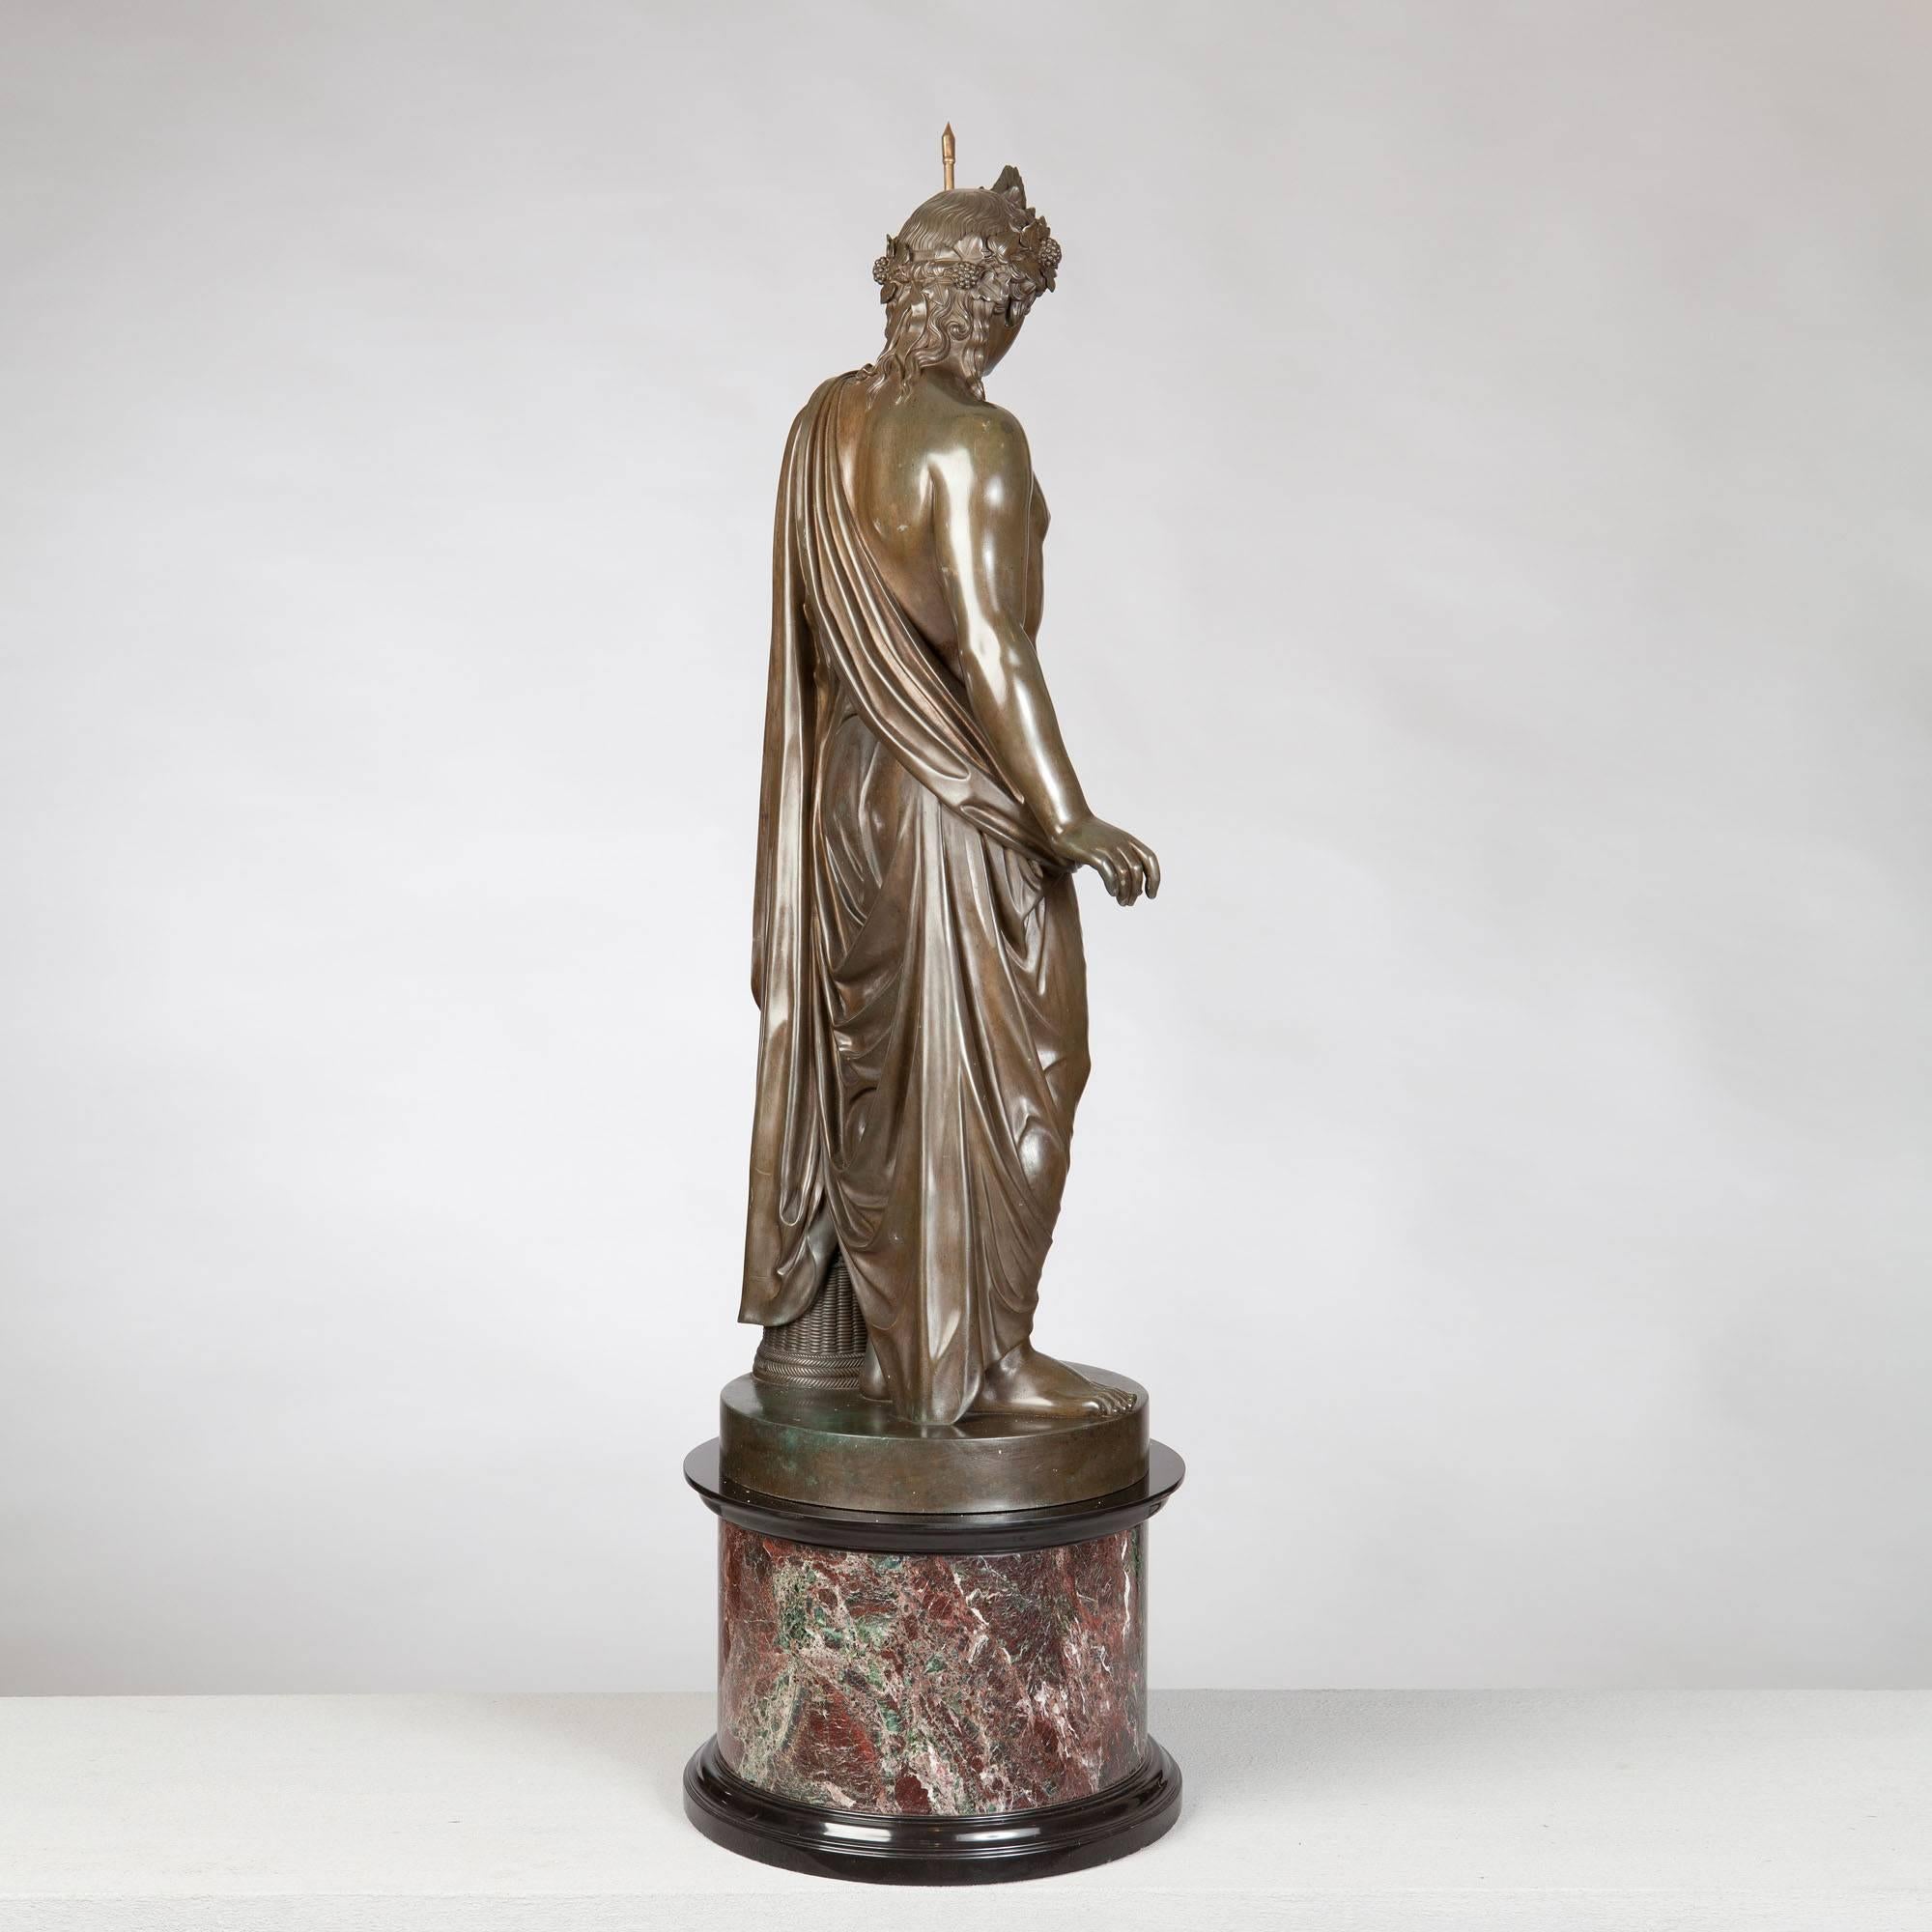 A bronze statue of a Roman classical figure holding a later sceptre by Boschetti, 19th century on a marble pedestal impressed BOSCHETTI / ROMA. 
Measures:
Height including base: 38in.
Diameter: 11in.

​Benedetto Boschetti was an Italian